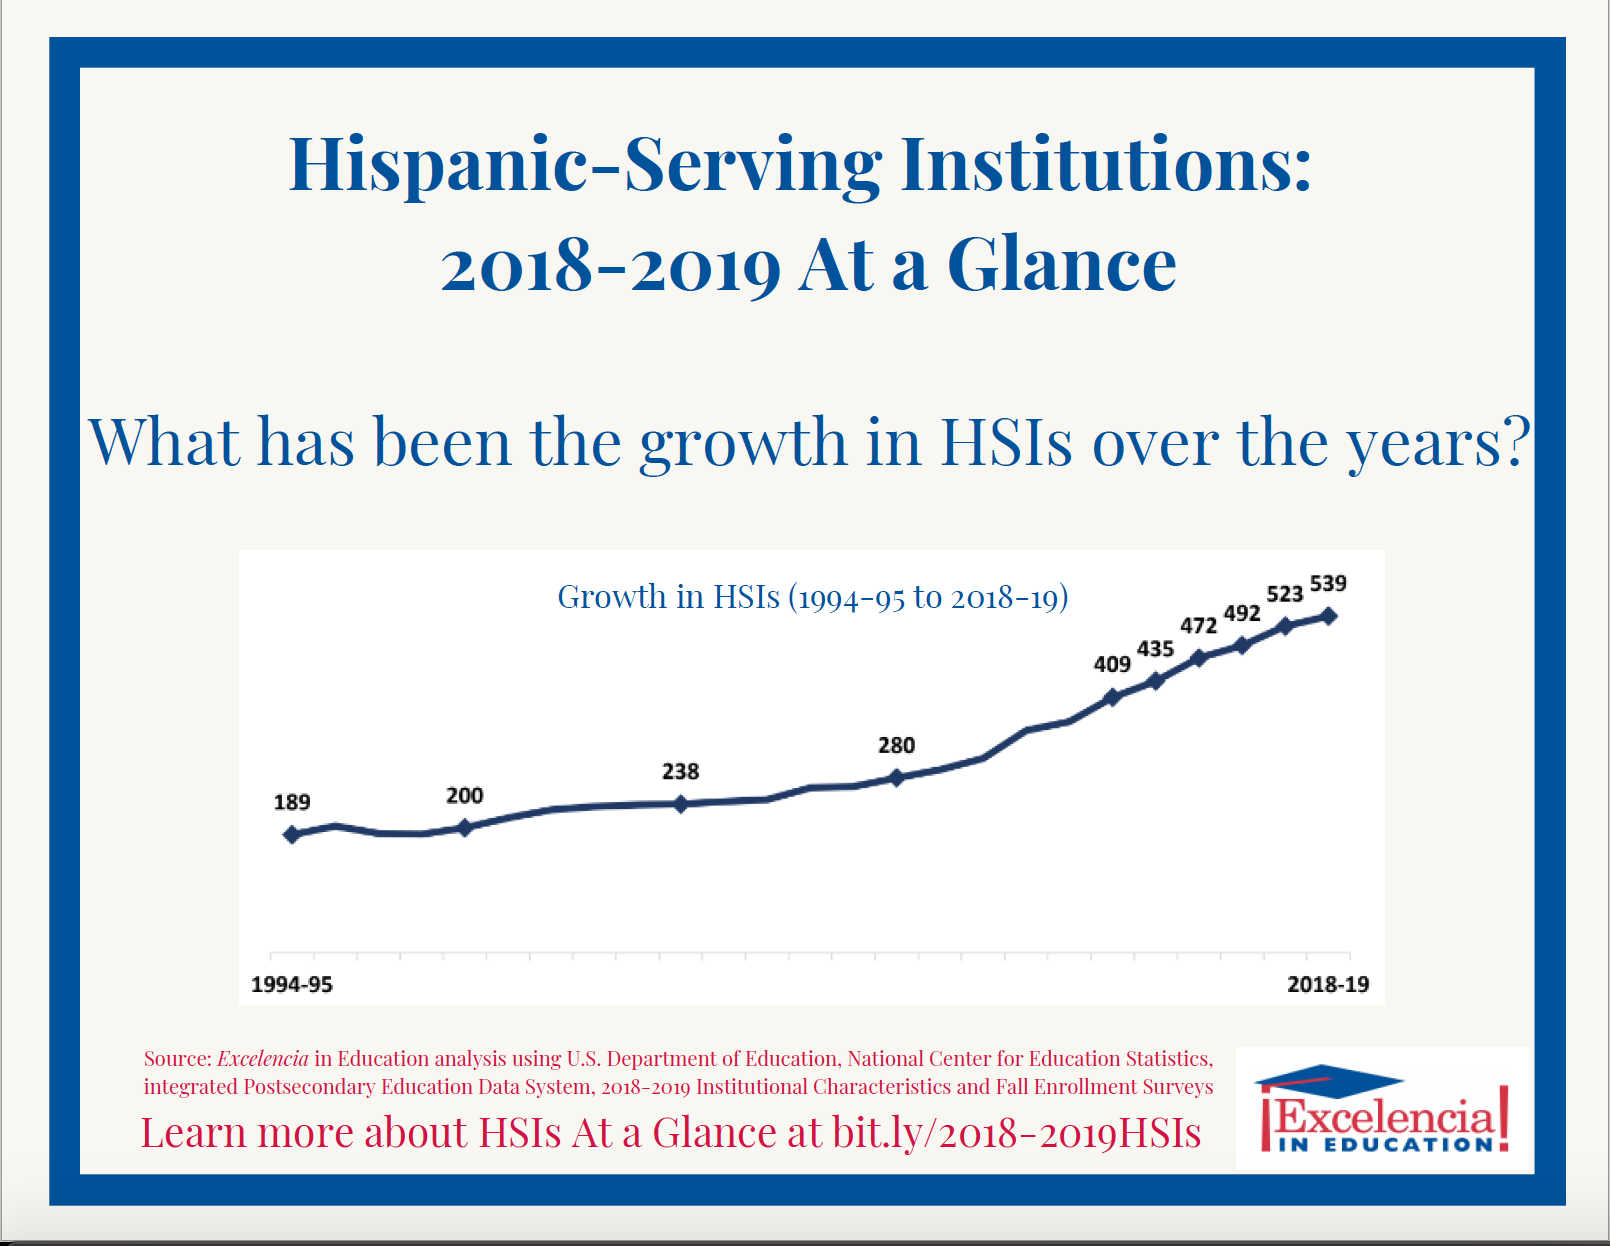 Graphic-HSIs at a Glance: 2018-19 - Growth Over the Years